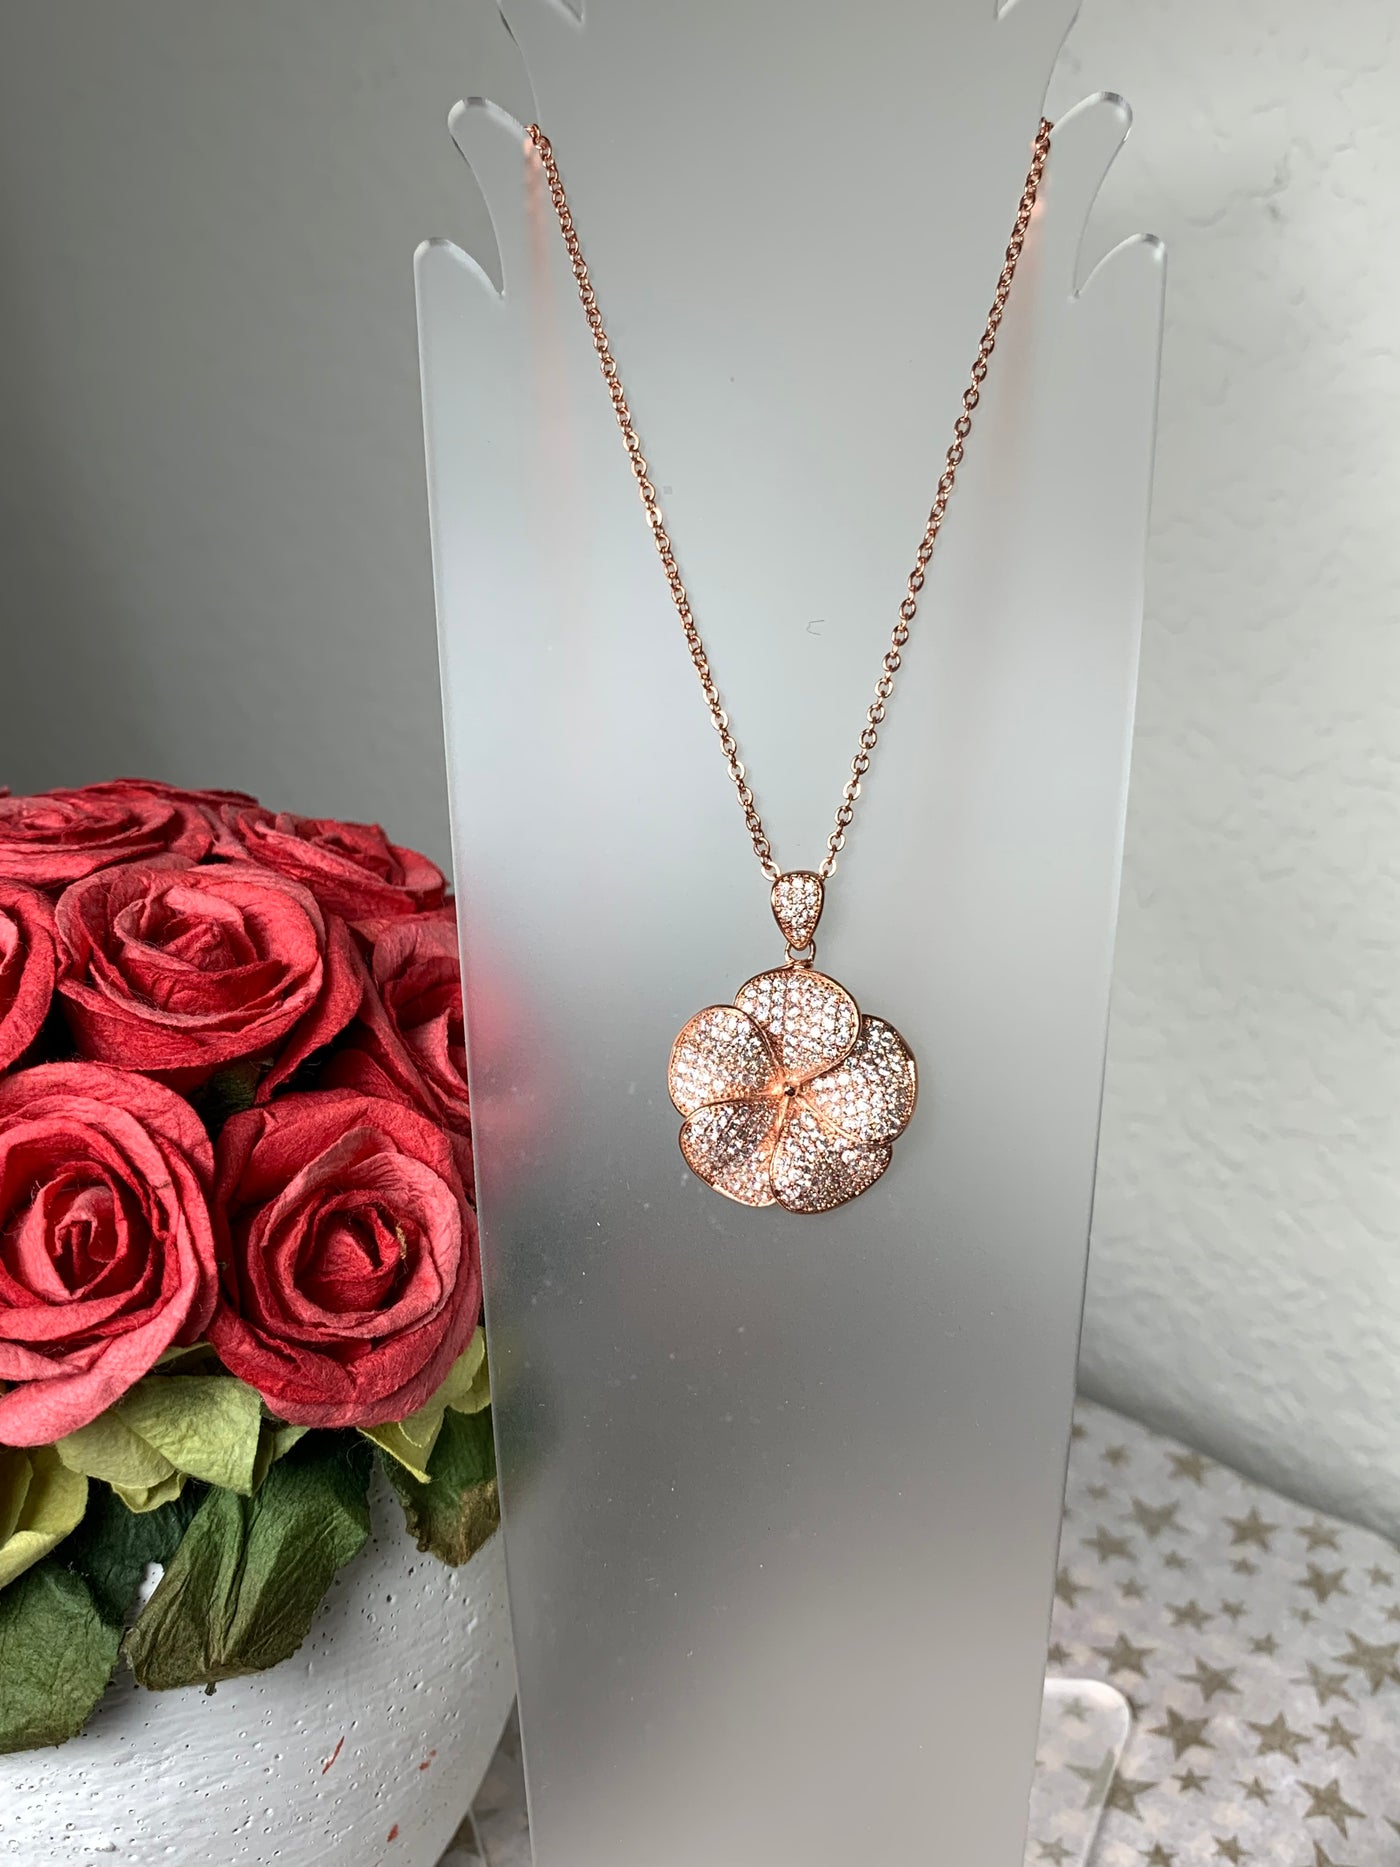 "Larger" Pave Set Cubic Zirconia Flower Pendant in Silver, Yellow Gold and Rose Gold Tone